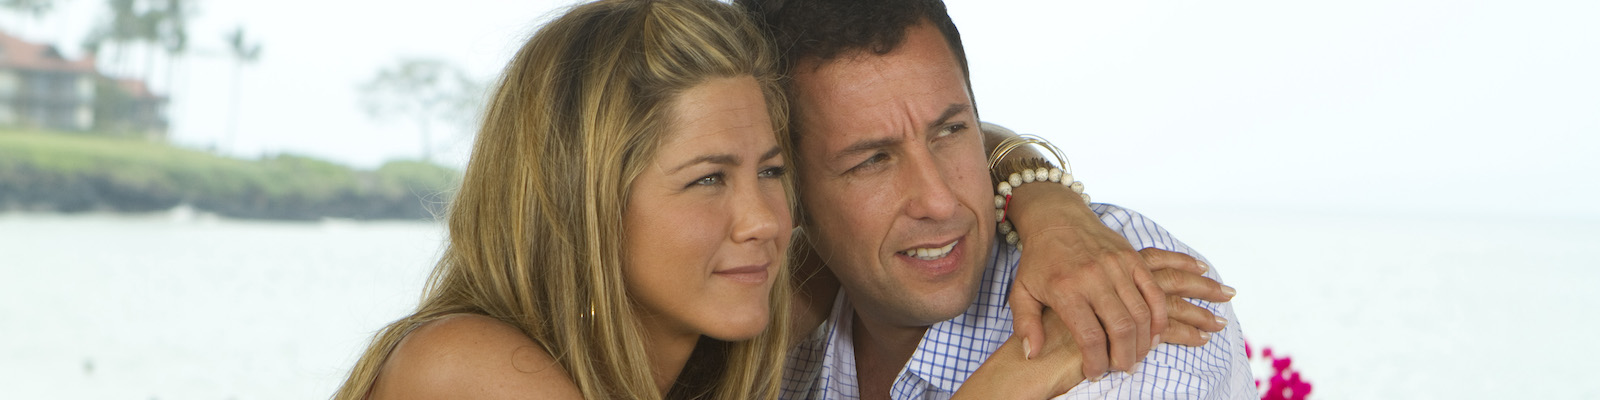 Jennifer Aniston (left) and Adam Sandler star in Columbia Pictures' comedy JUST GO WITH IT.